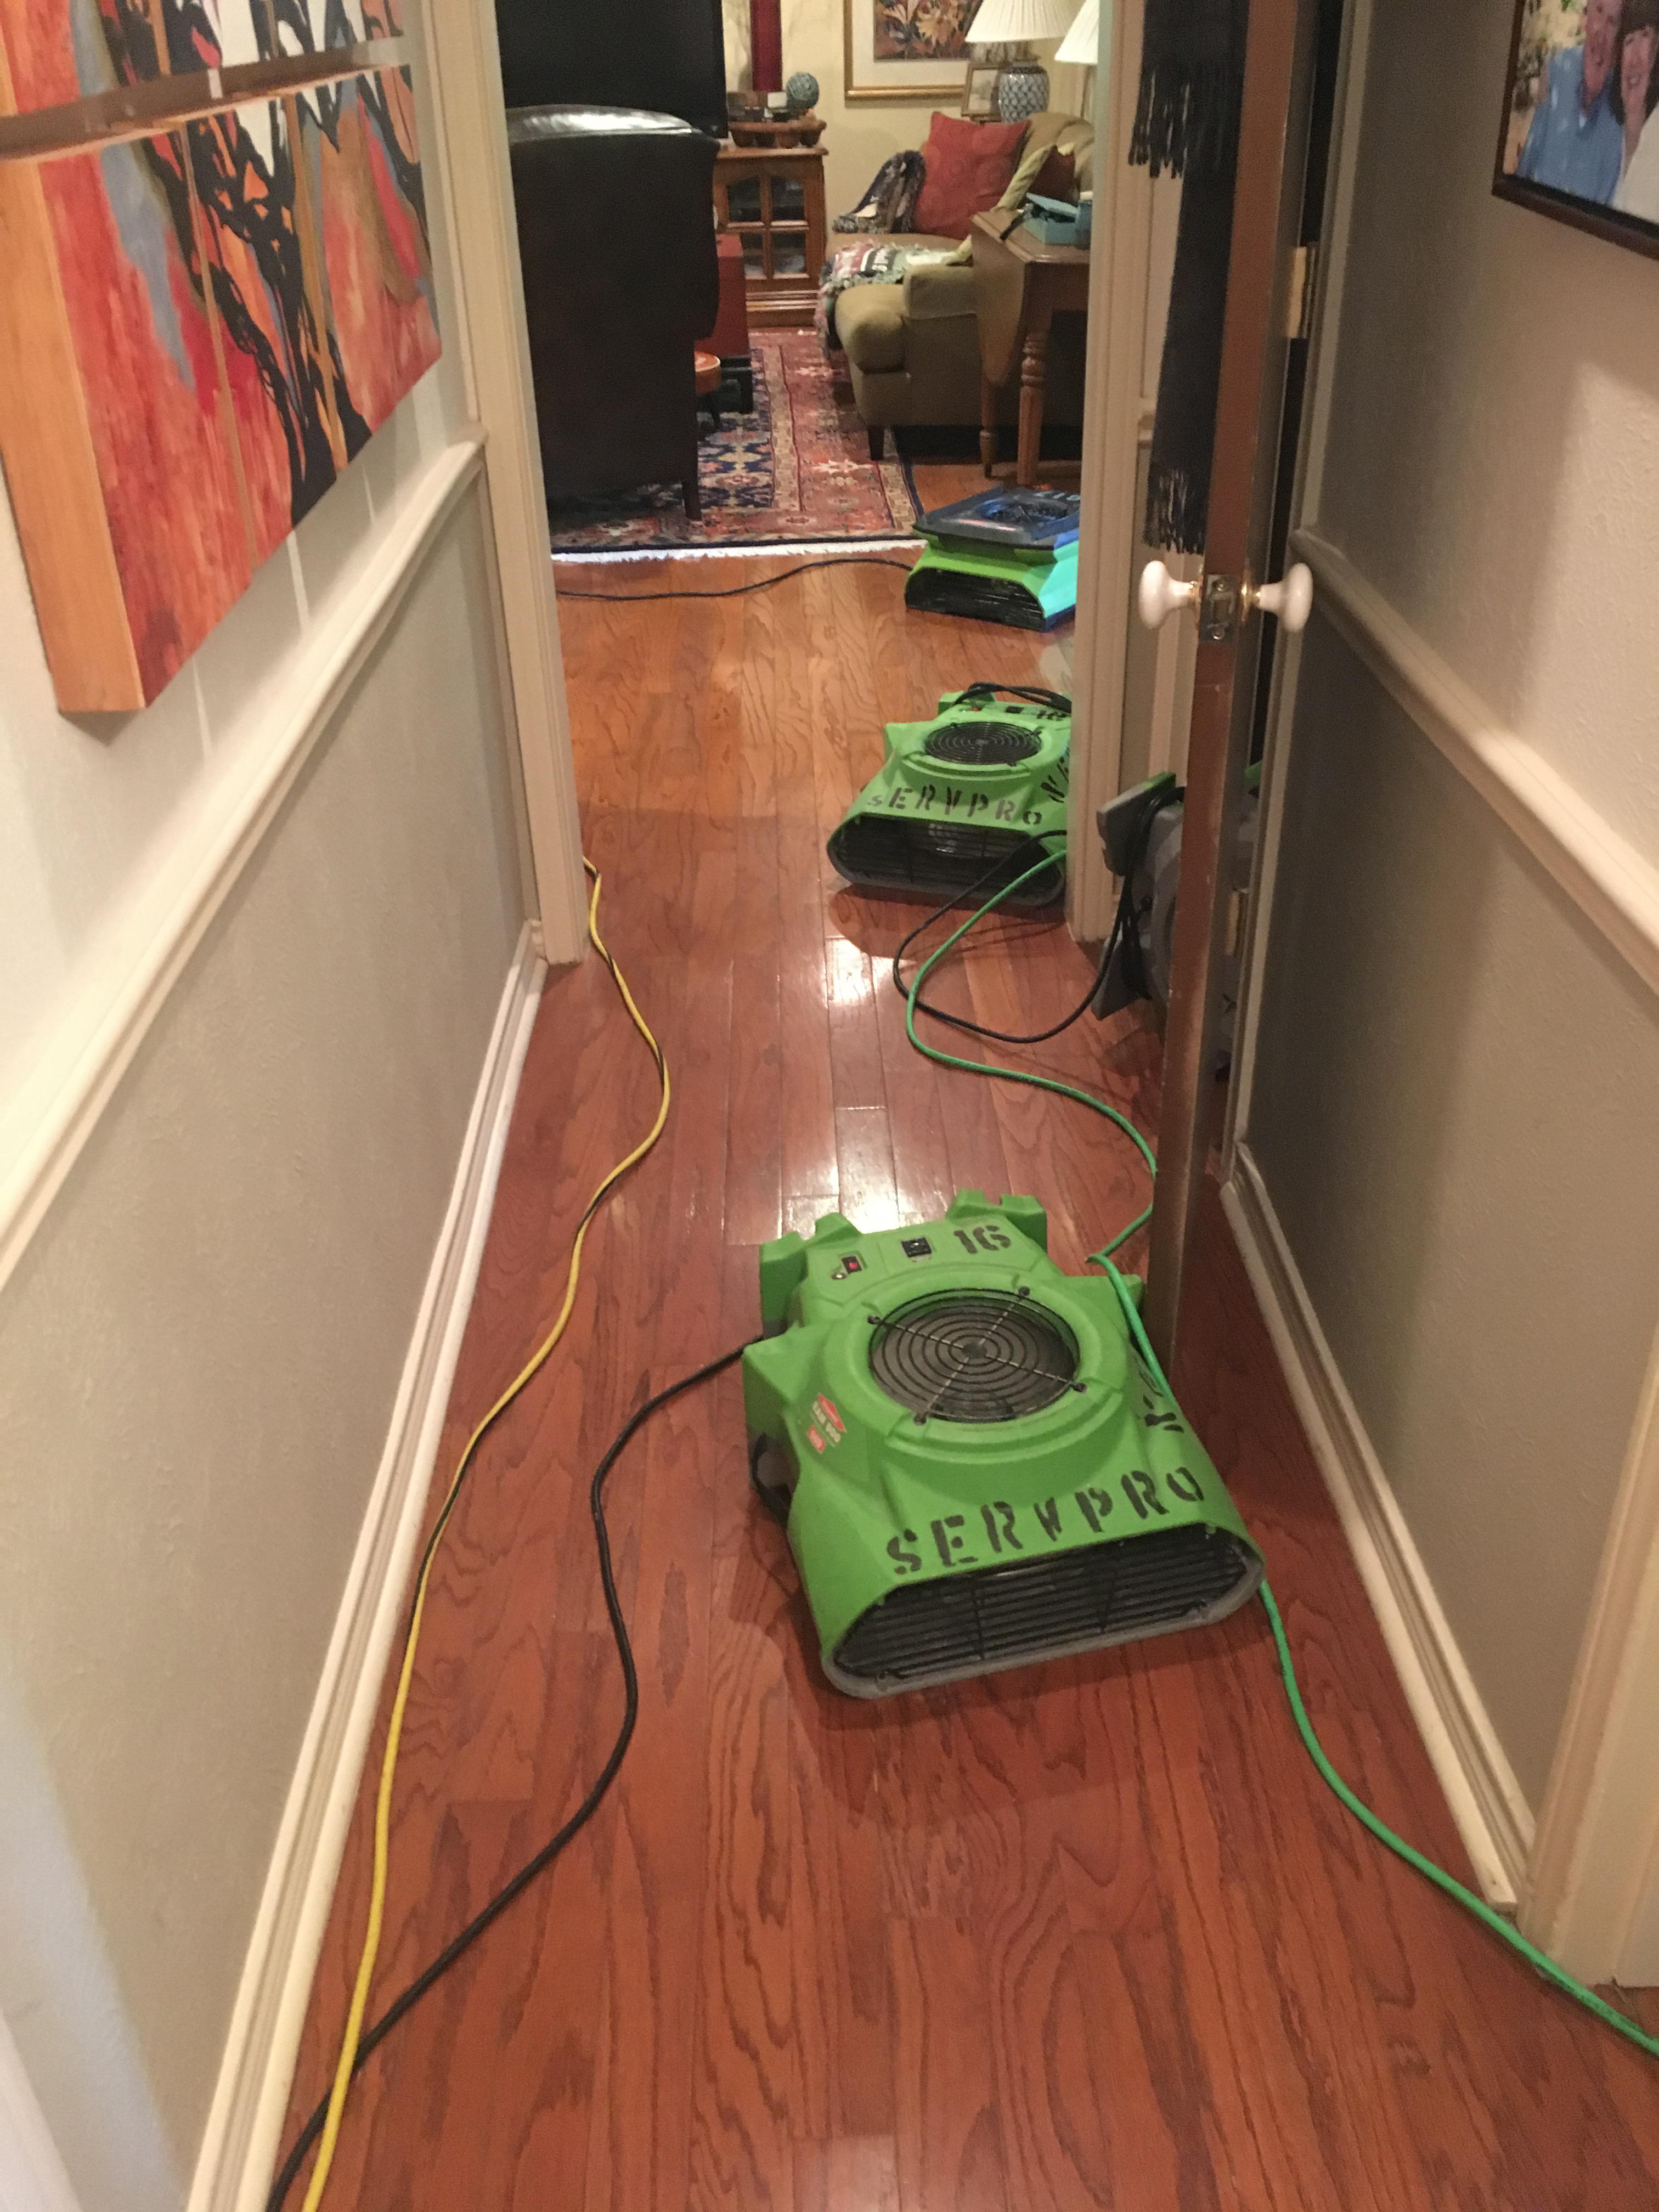 Air movers are utilized to help mitigate after water damage!